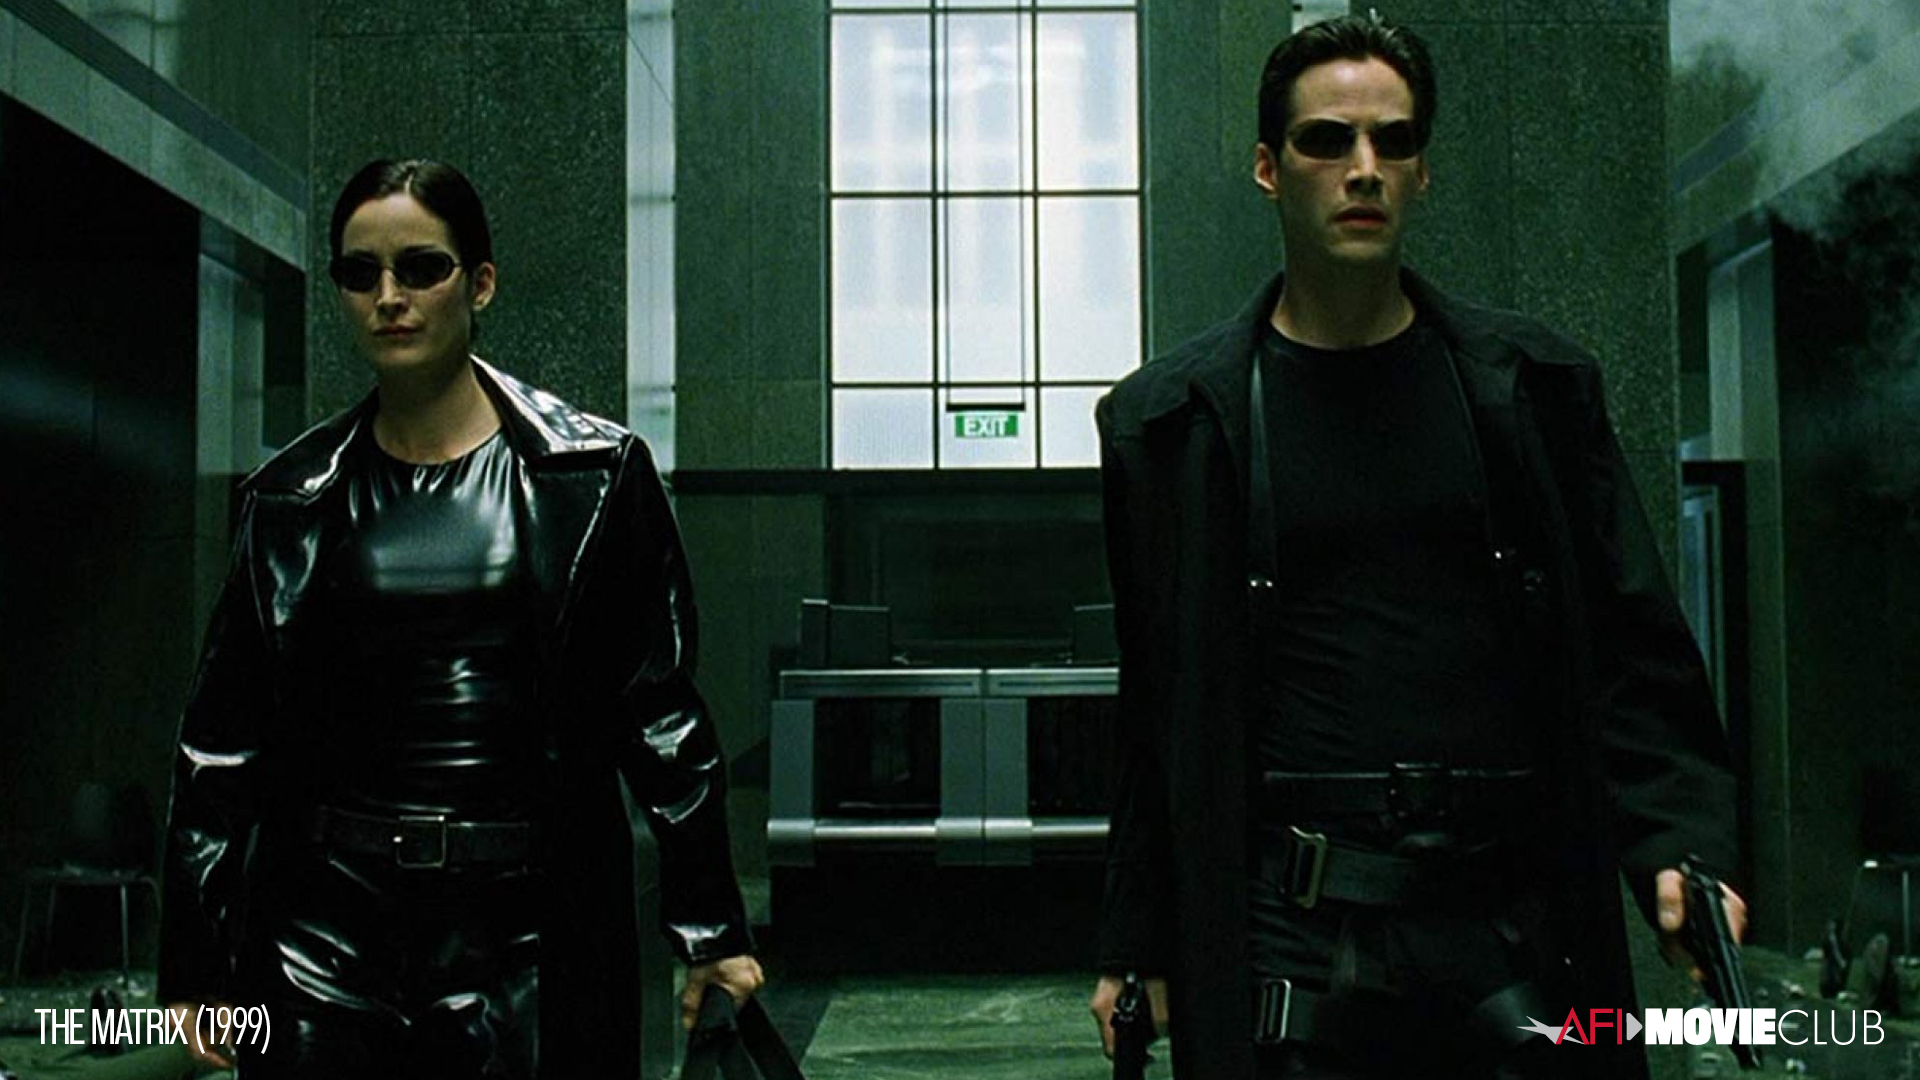 The Matrix Film Still - Keanu Reeves and Carrie-Anne Moss